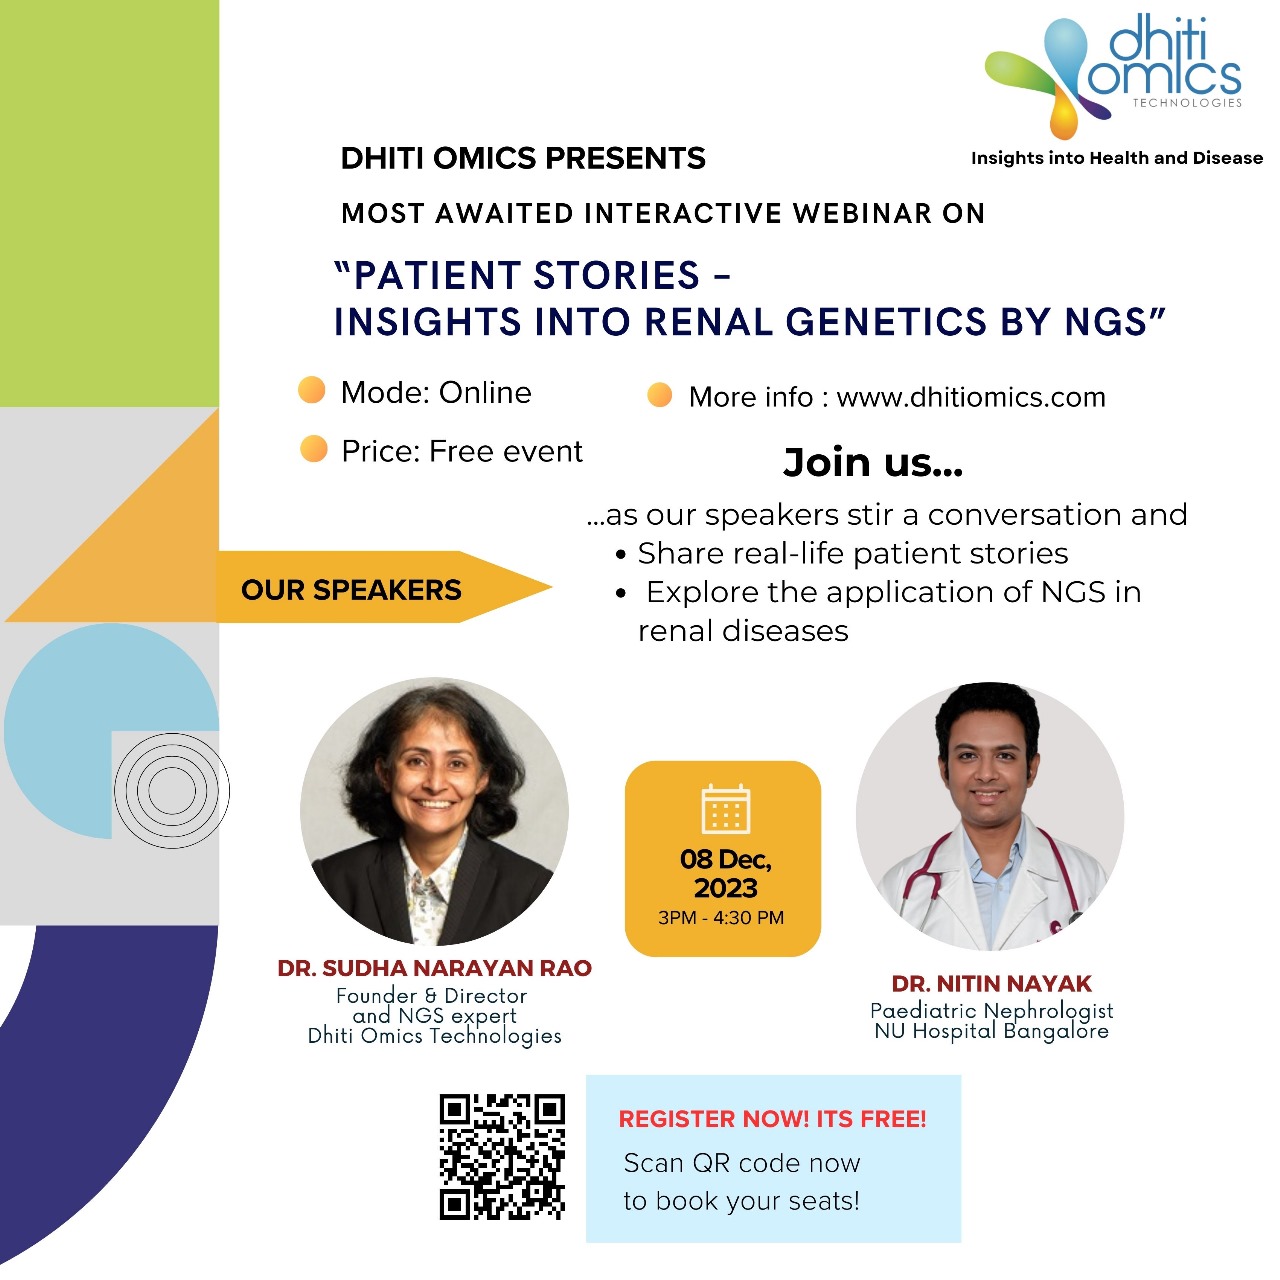 patient-stories-insights-into-renal-genetics-by-ngs